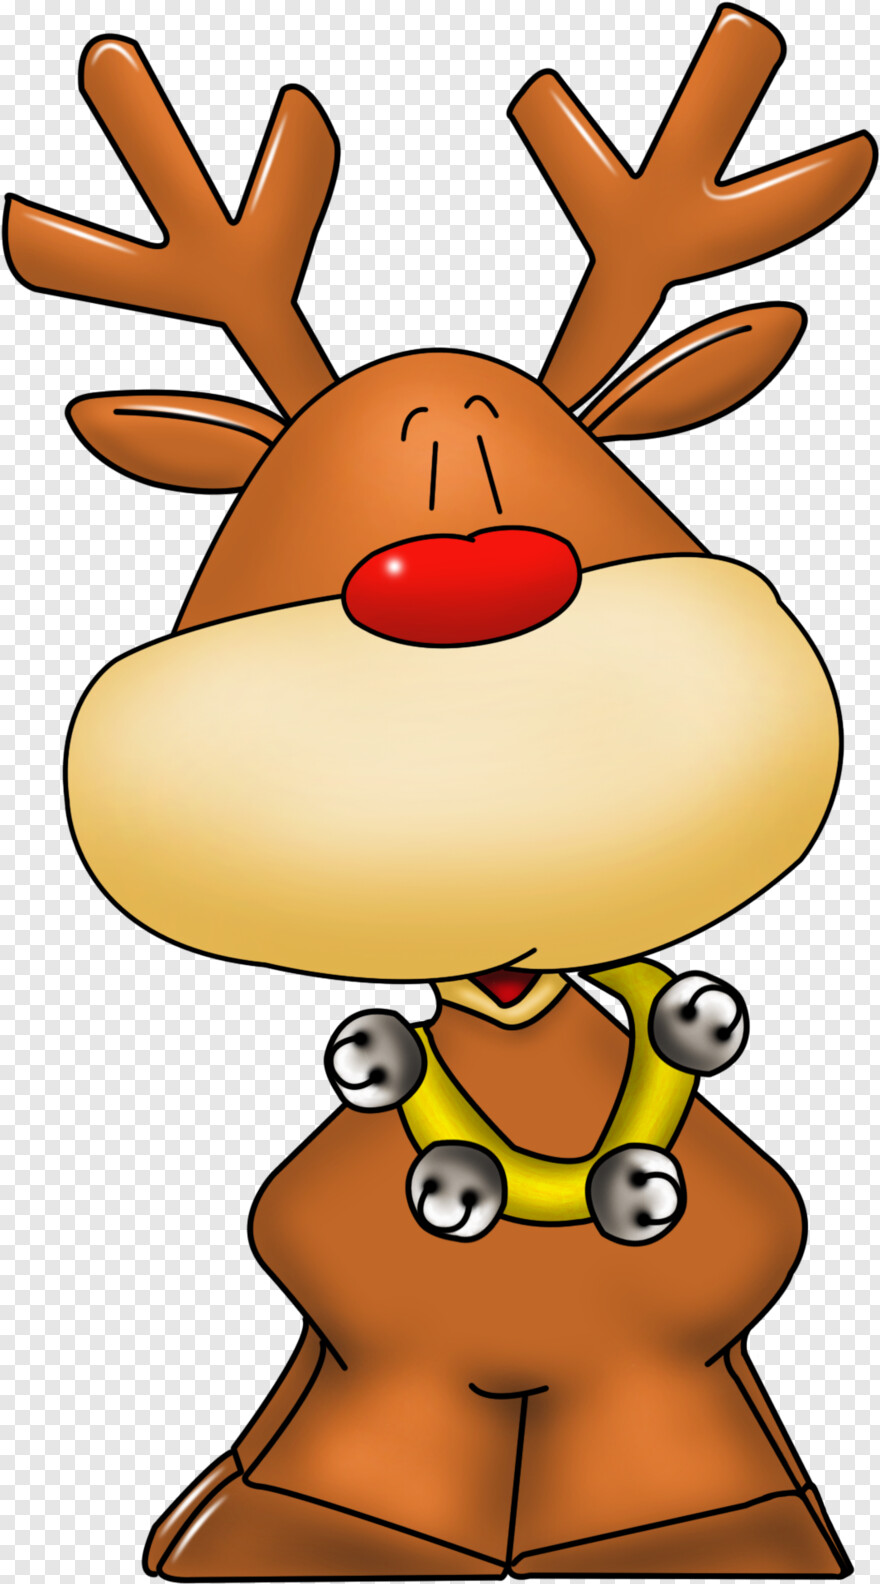 rudolph-the-red-nosed-reindeer # 427678